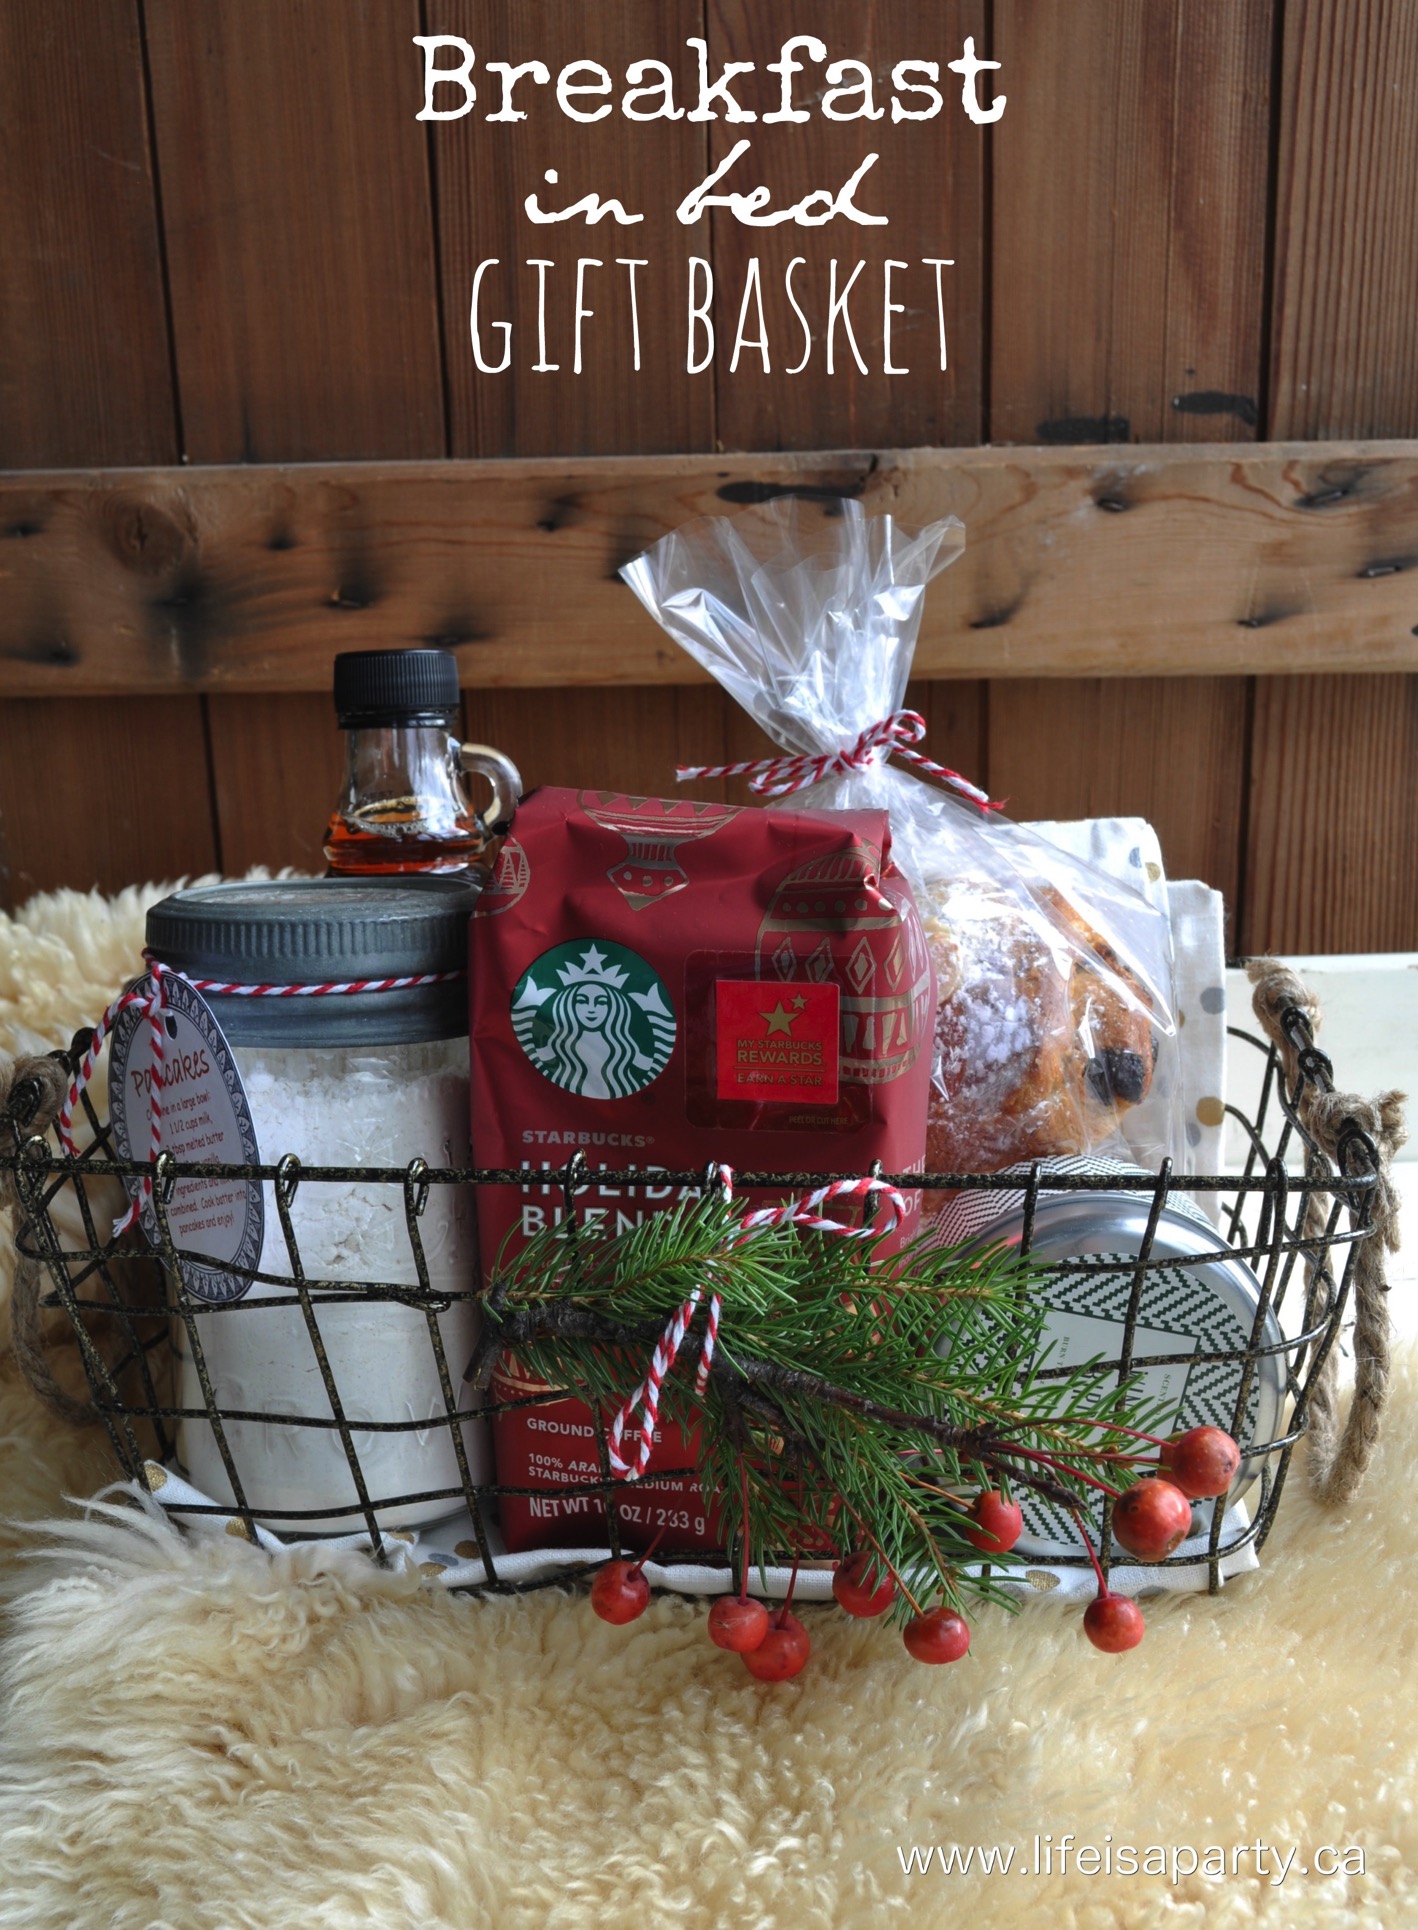 15 Awesome Color Basket Gift Ideas for Any Occasion